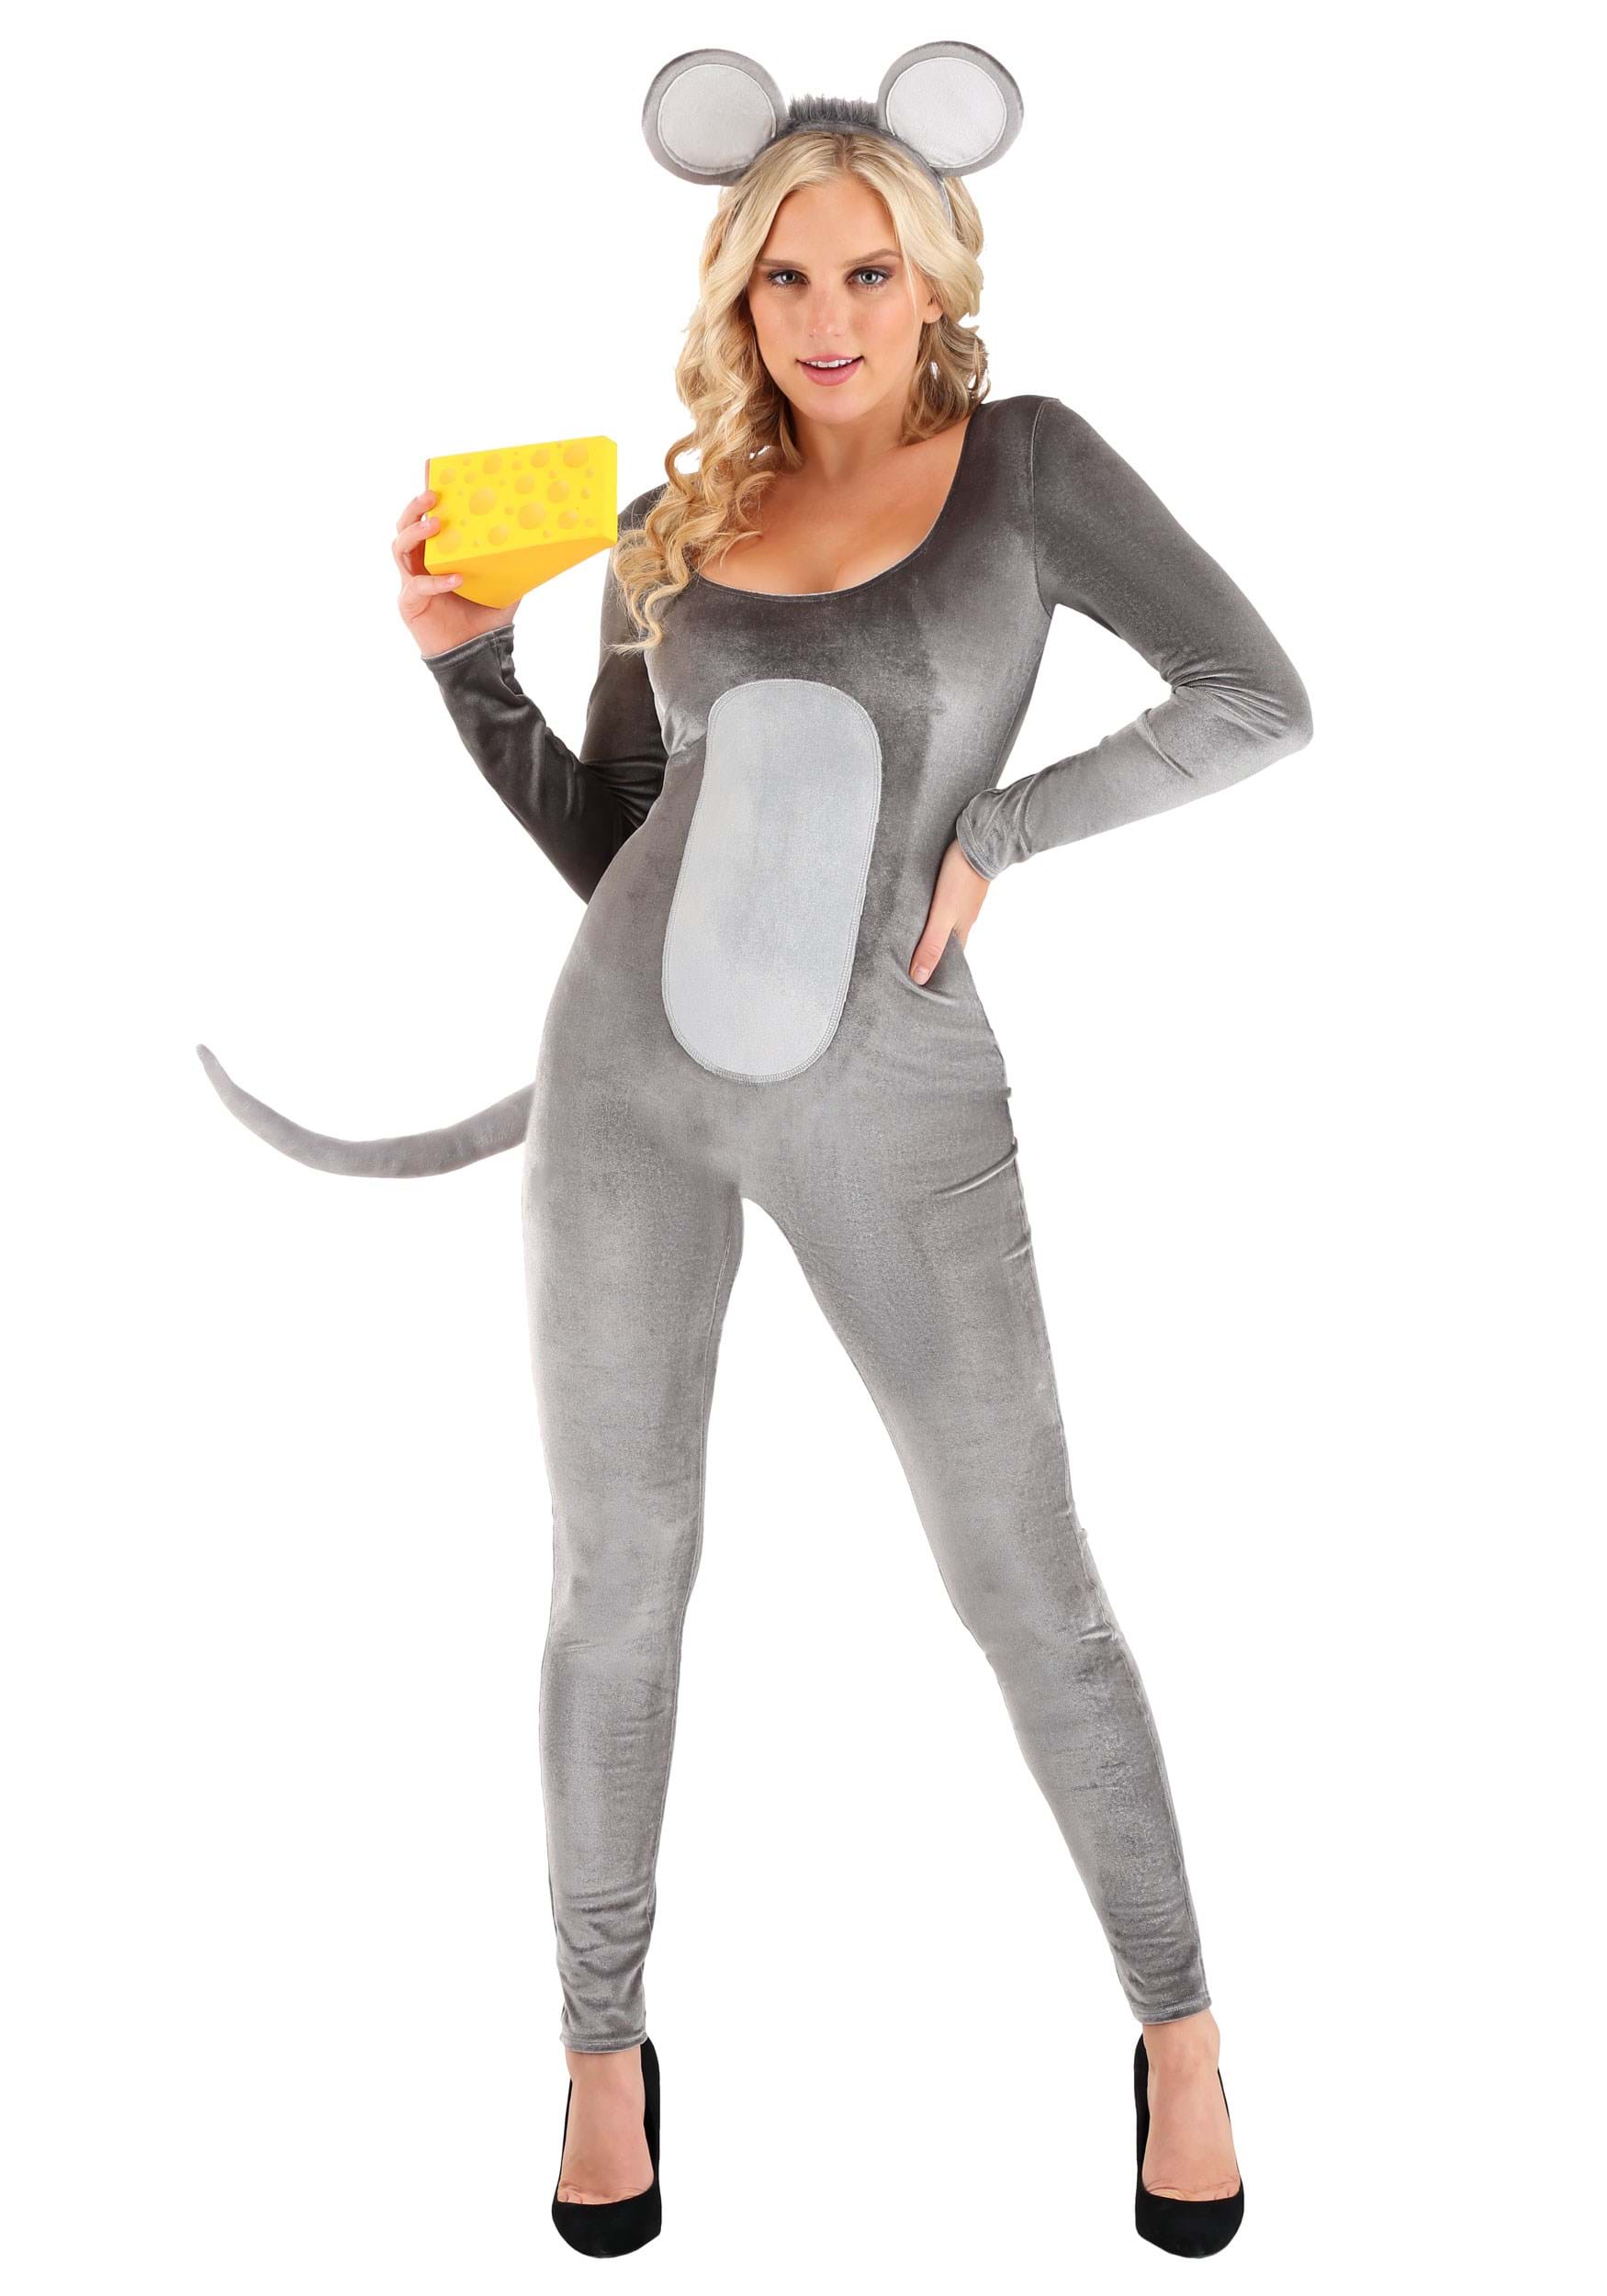 Photos - Fancy Dress FUN Costumes Mouse Jumpsuit Costume for Women's Gray FUN1756AD